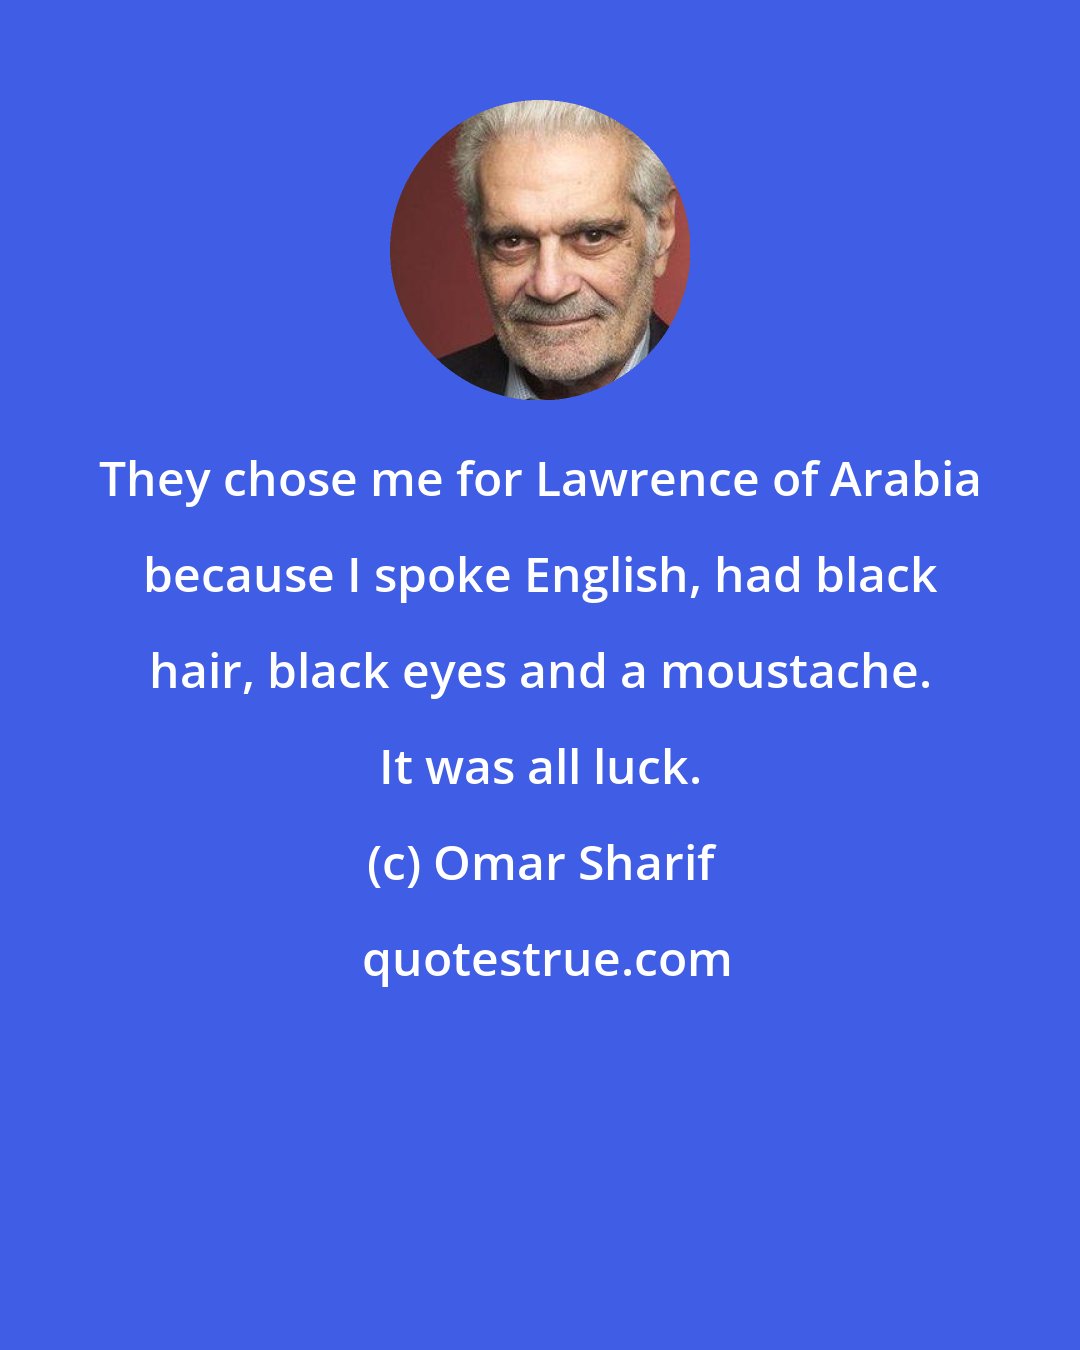 Omar Sharif: They chose me for Lawrence of Arabia because I spoke English, had black hair, black eyes and a moustache. It was all luck.